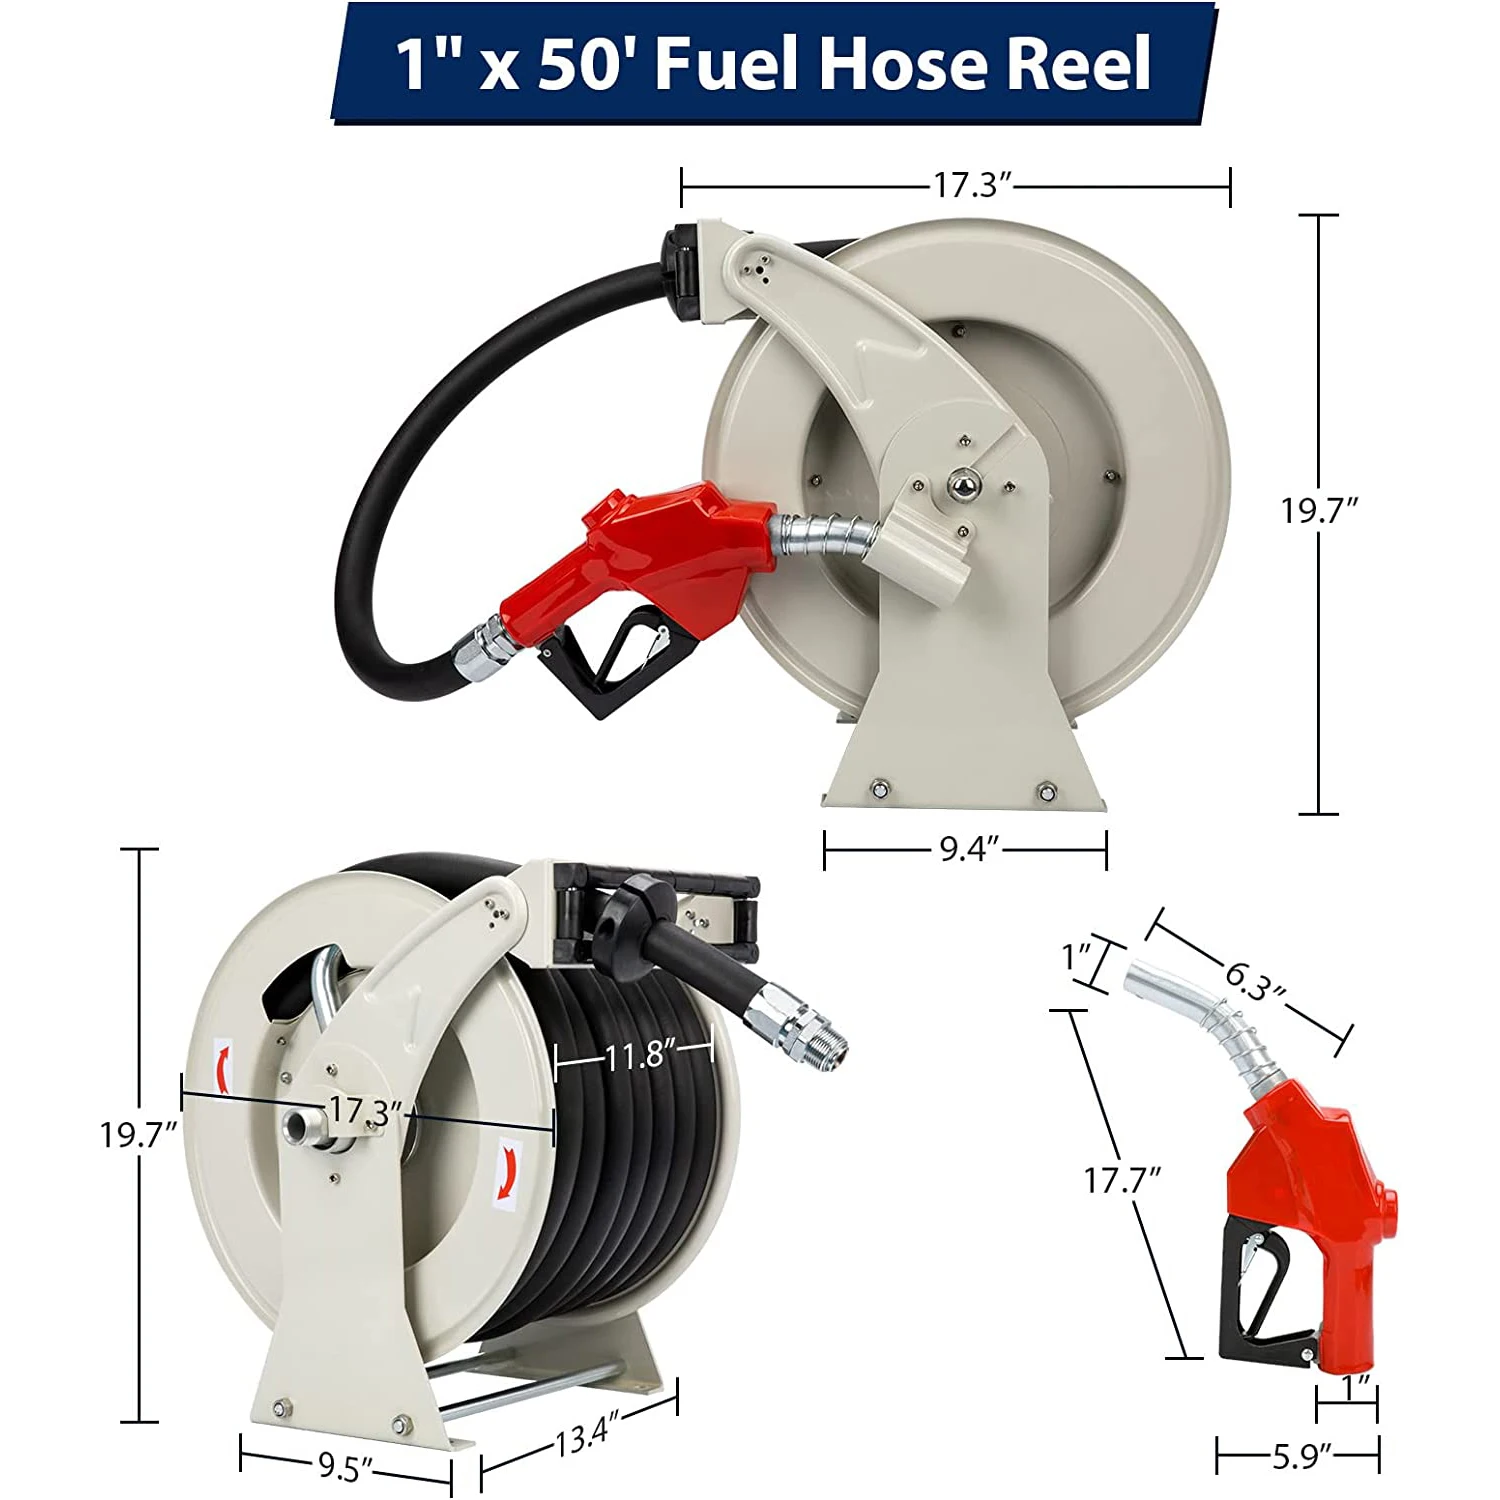 Fuel Hose Reel 1 x 50' Spring Driven Retractable Diesel Hose Reel 300 PSI  Industrial Auto Swivel Hose Reel with Fueling Nozzle - AliExpress